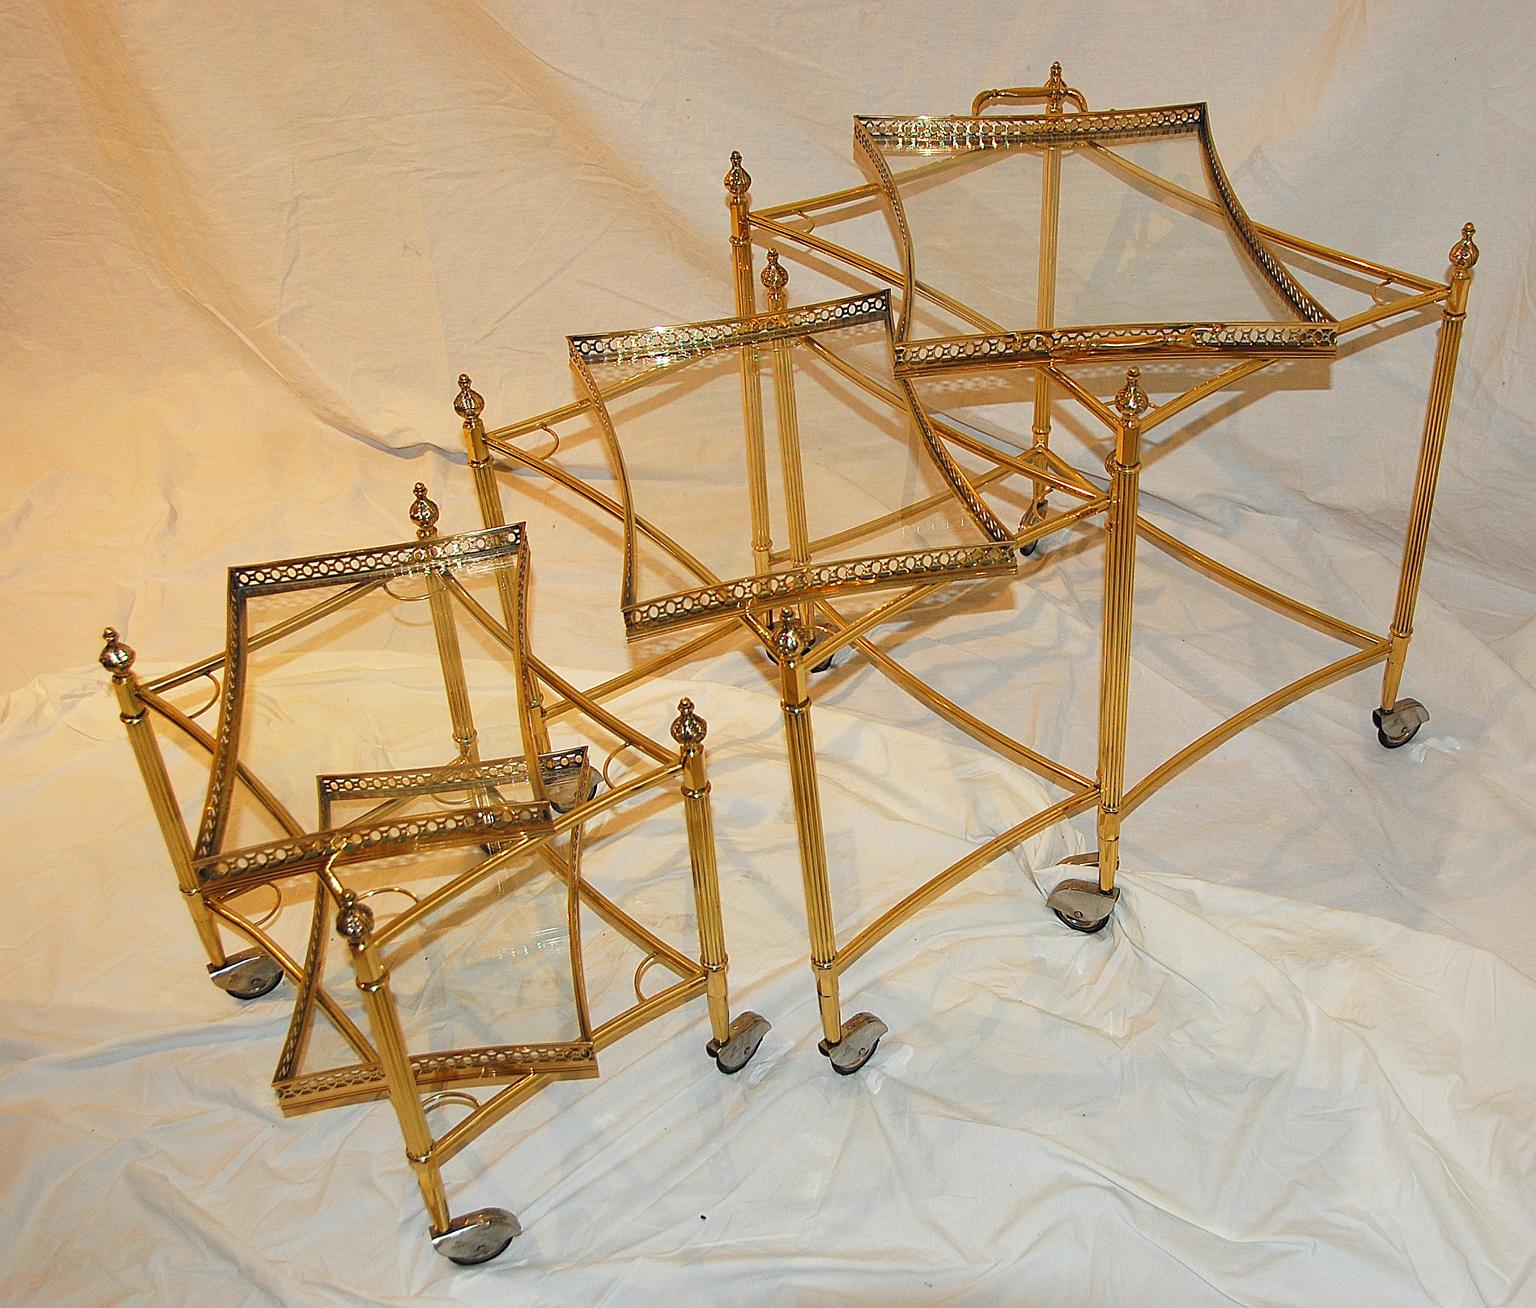 English nesting set of three brass bar carts with removable galleried brass and glass trays. The three carts are rectangular with graceful concave sides. The galleries of each tray are pierced, the smallest cart having two trays, the other two